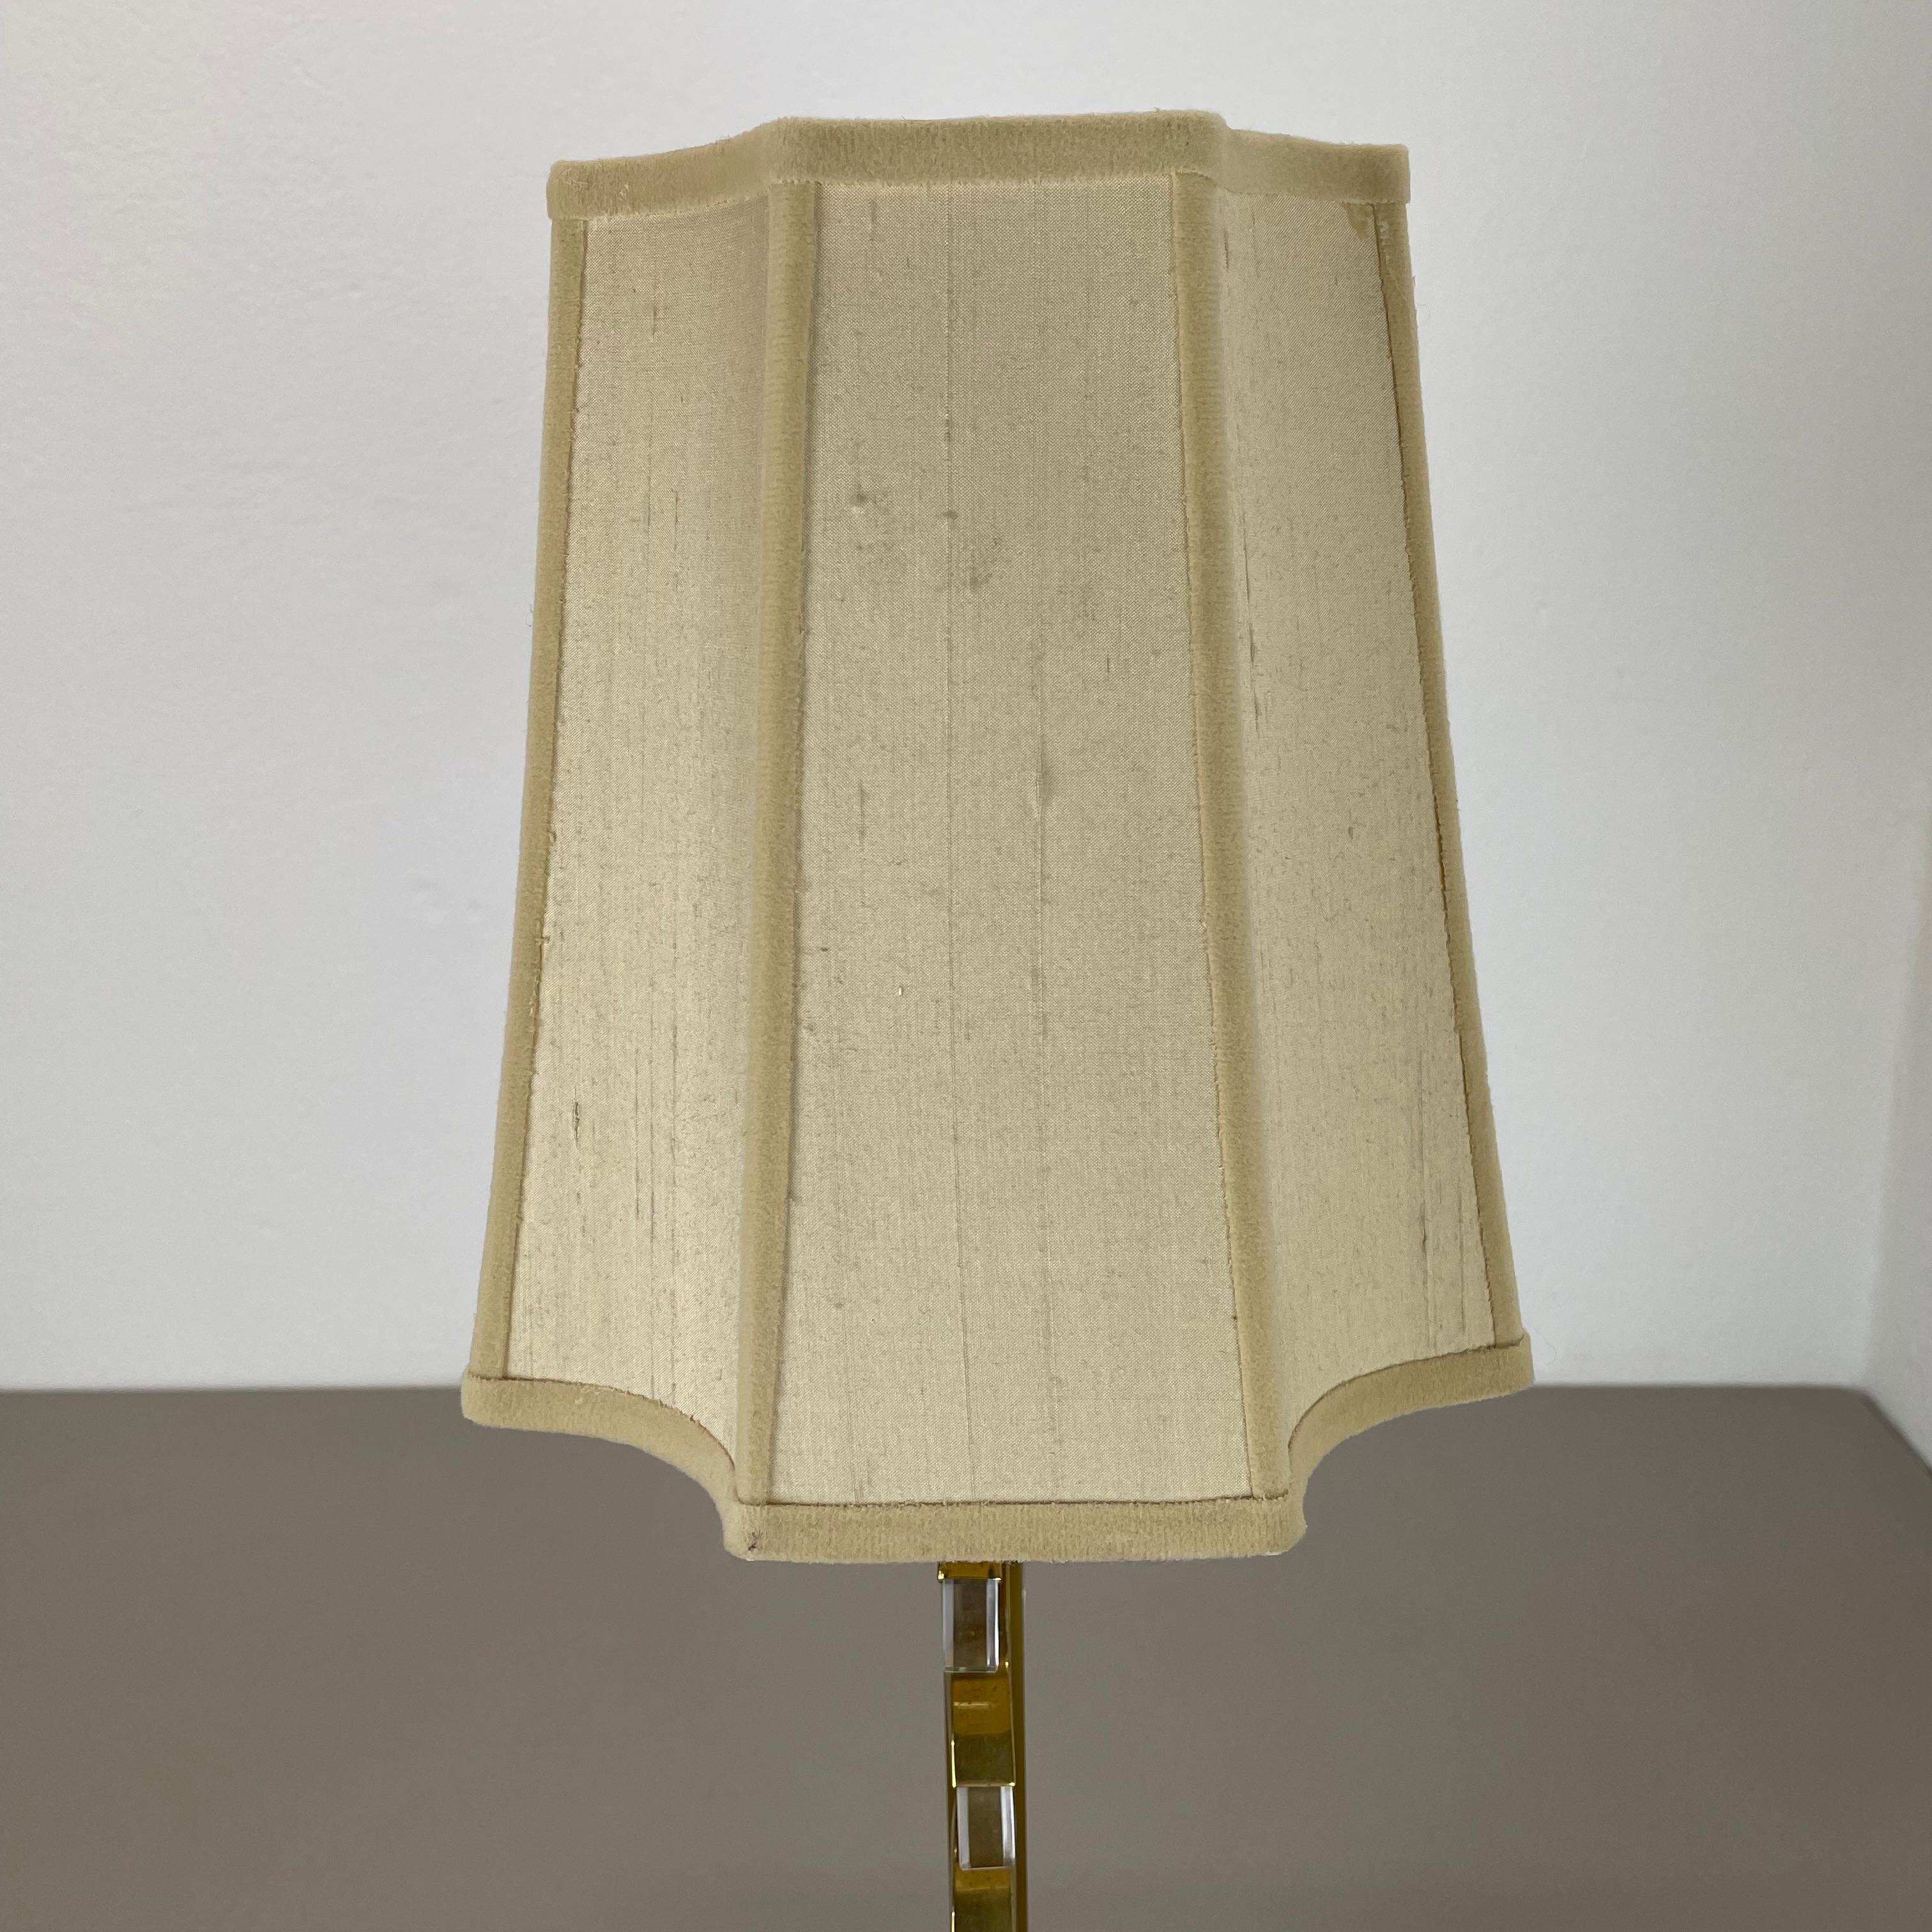 Italian Hollywood Regency Style Brass and Acryl Table Light by WKR Lights, Germany 1970s For Sale